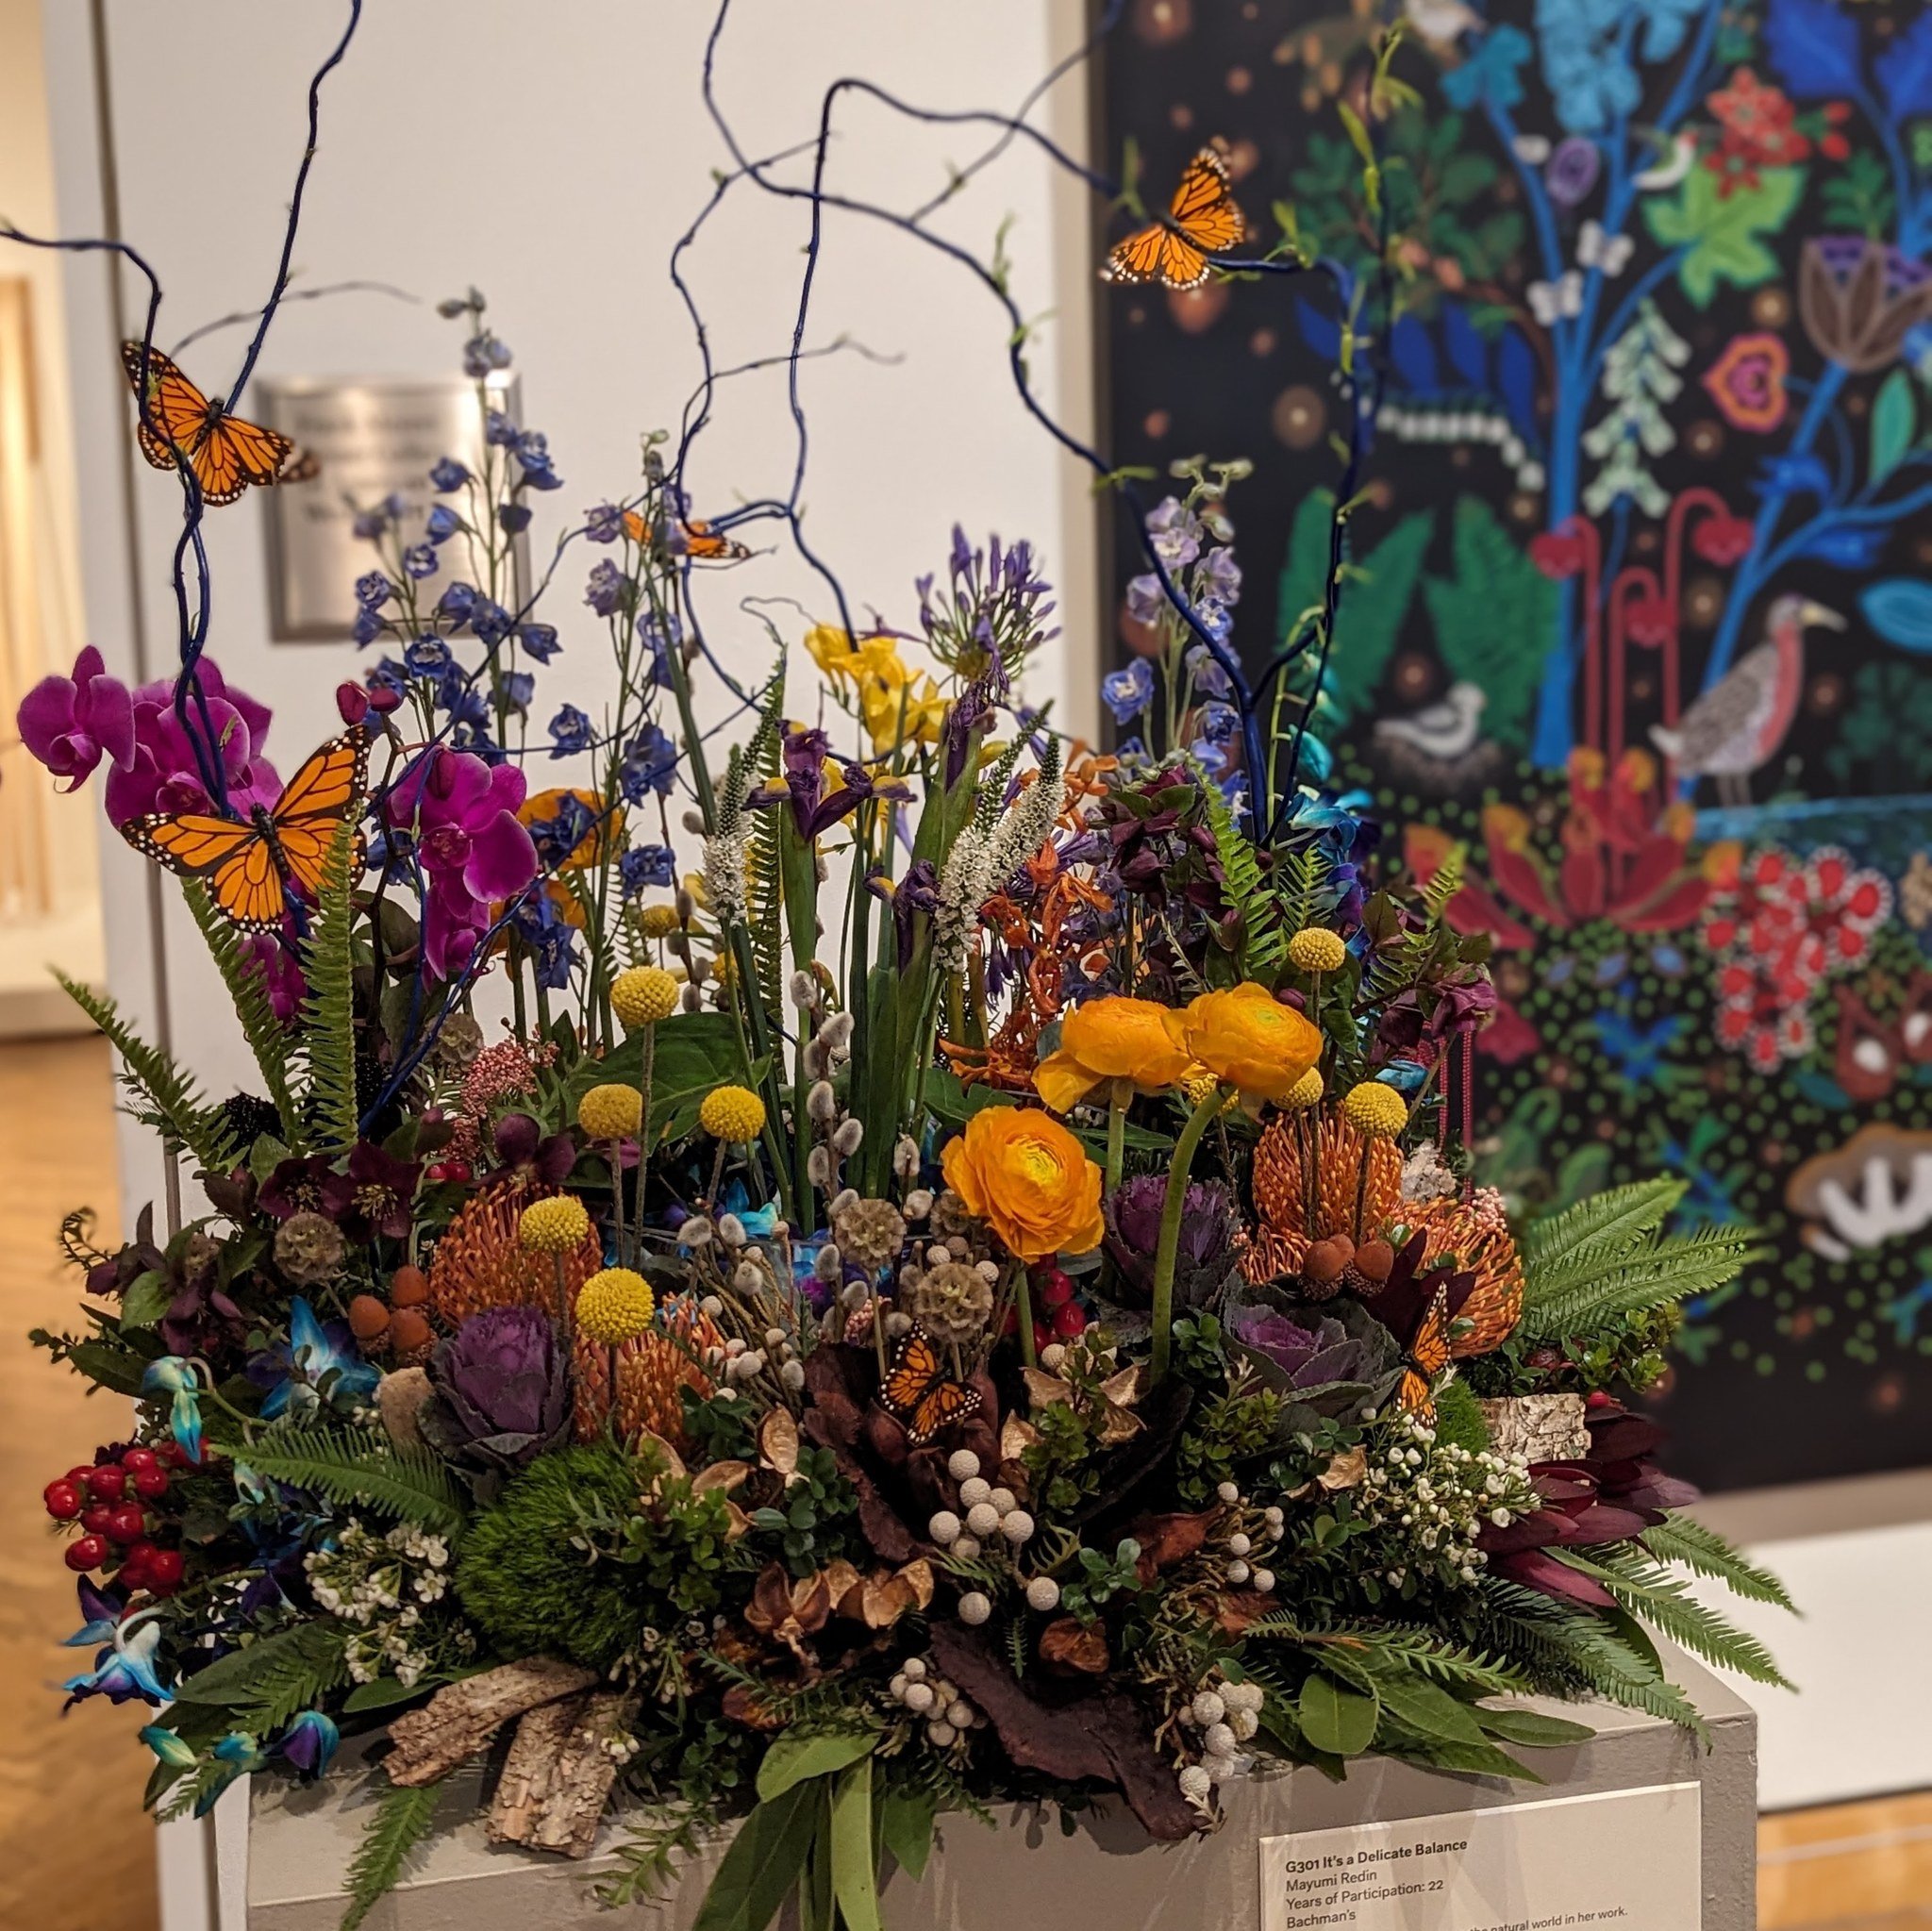 Art in Bloom at MIA did not disappoint yesterday. My friend and I joined a mass of humanity, all enjoying the display of art and the flower arrangements they inspired. Waiting for my friend outside the gift shop, my heart thrilled at the throngs of p